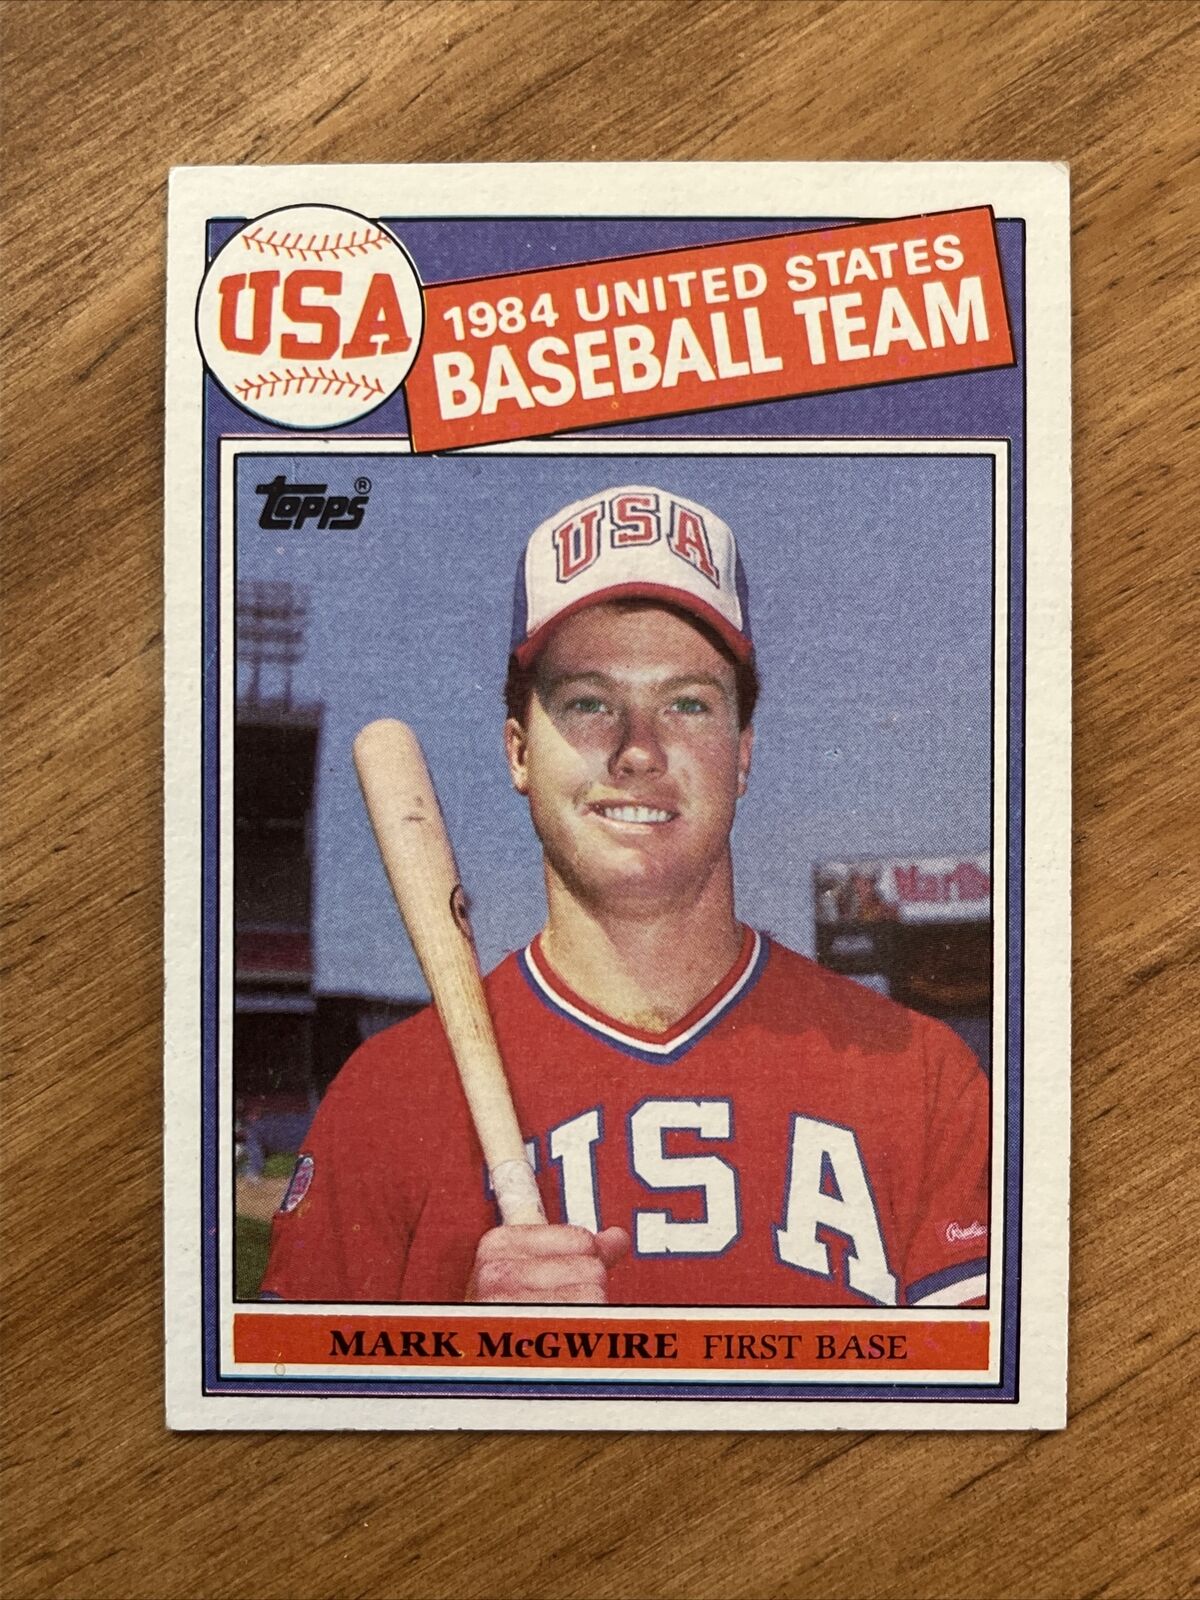 1985 Topps Mark McGwire Olympic card.